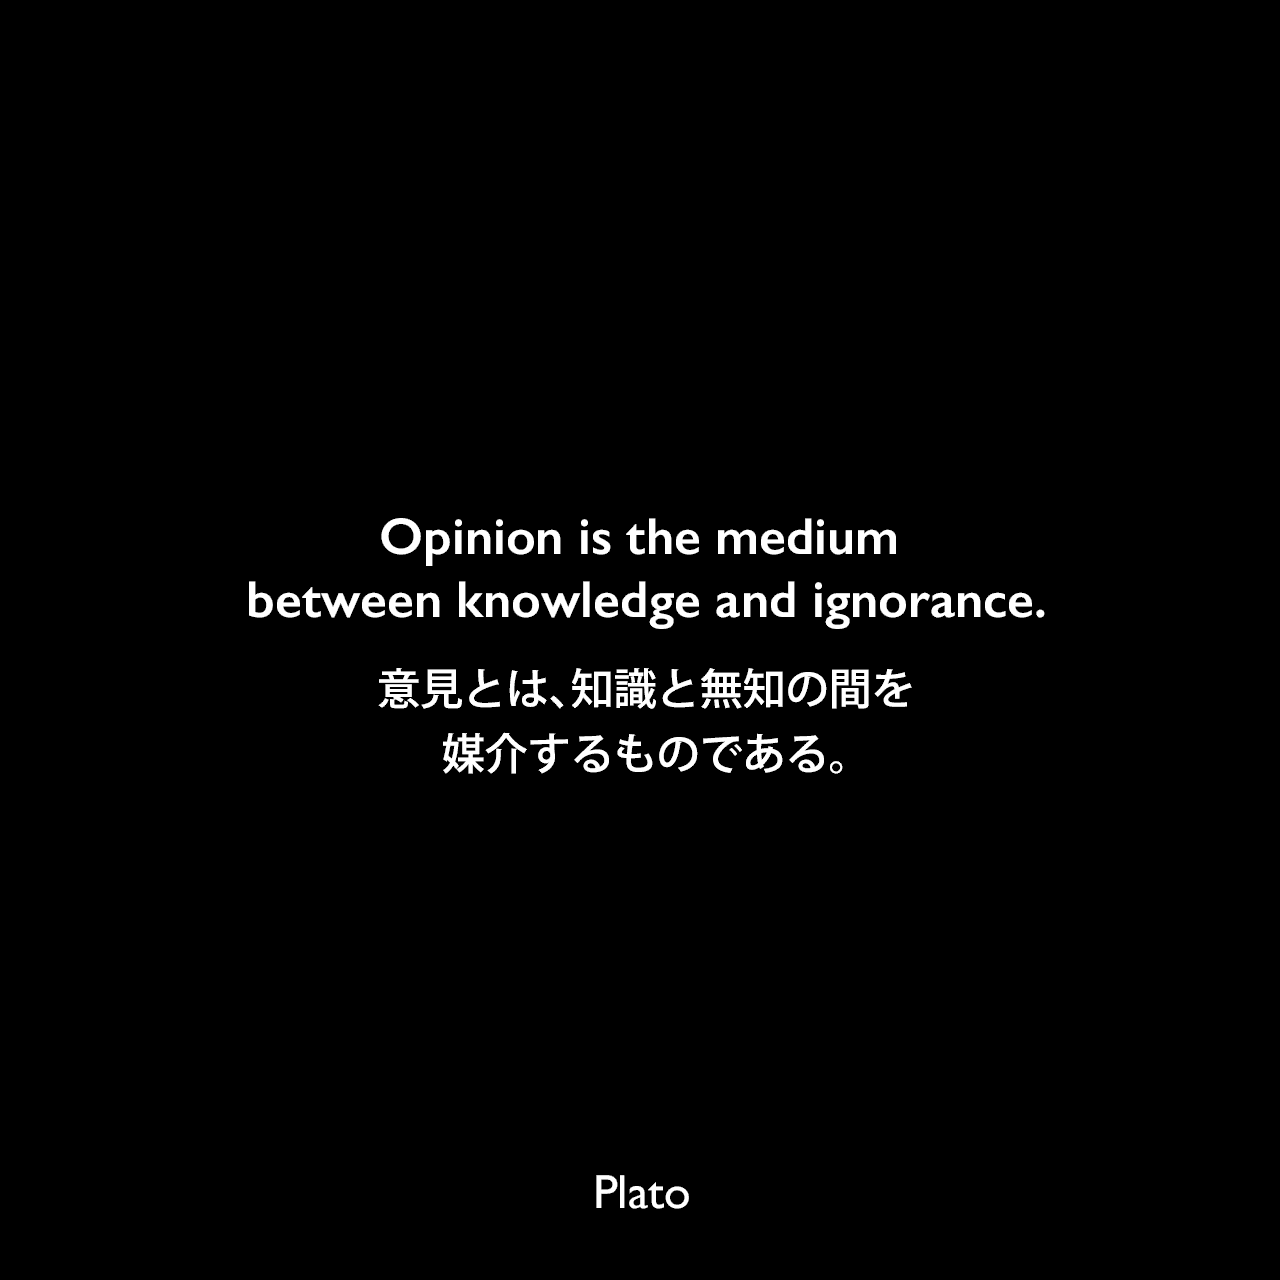 Opinion is the medium between knowledge and ignorance.意見とは、知識と無知の間を媒介するものである。Plato